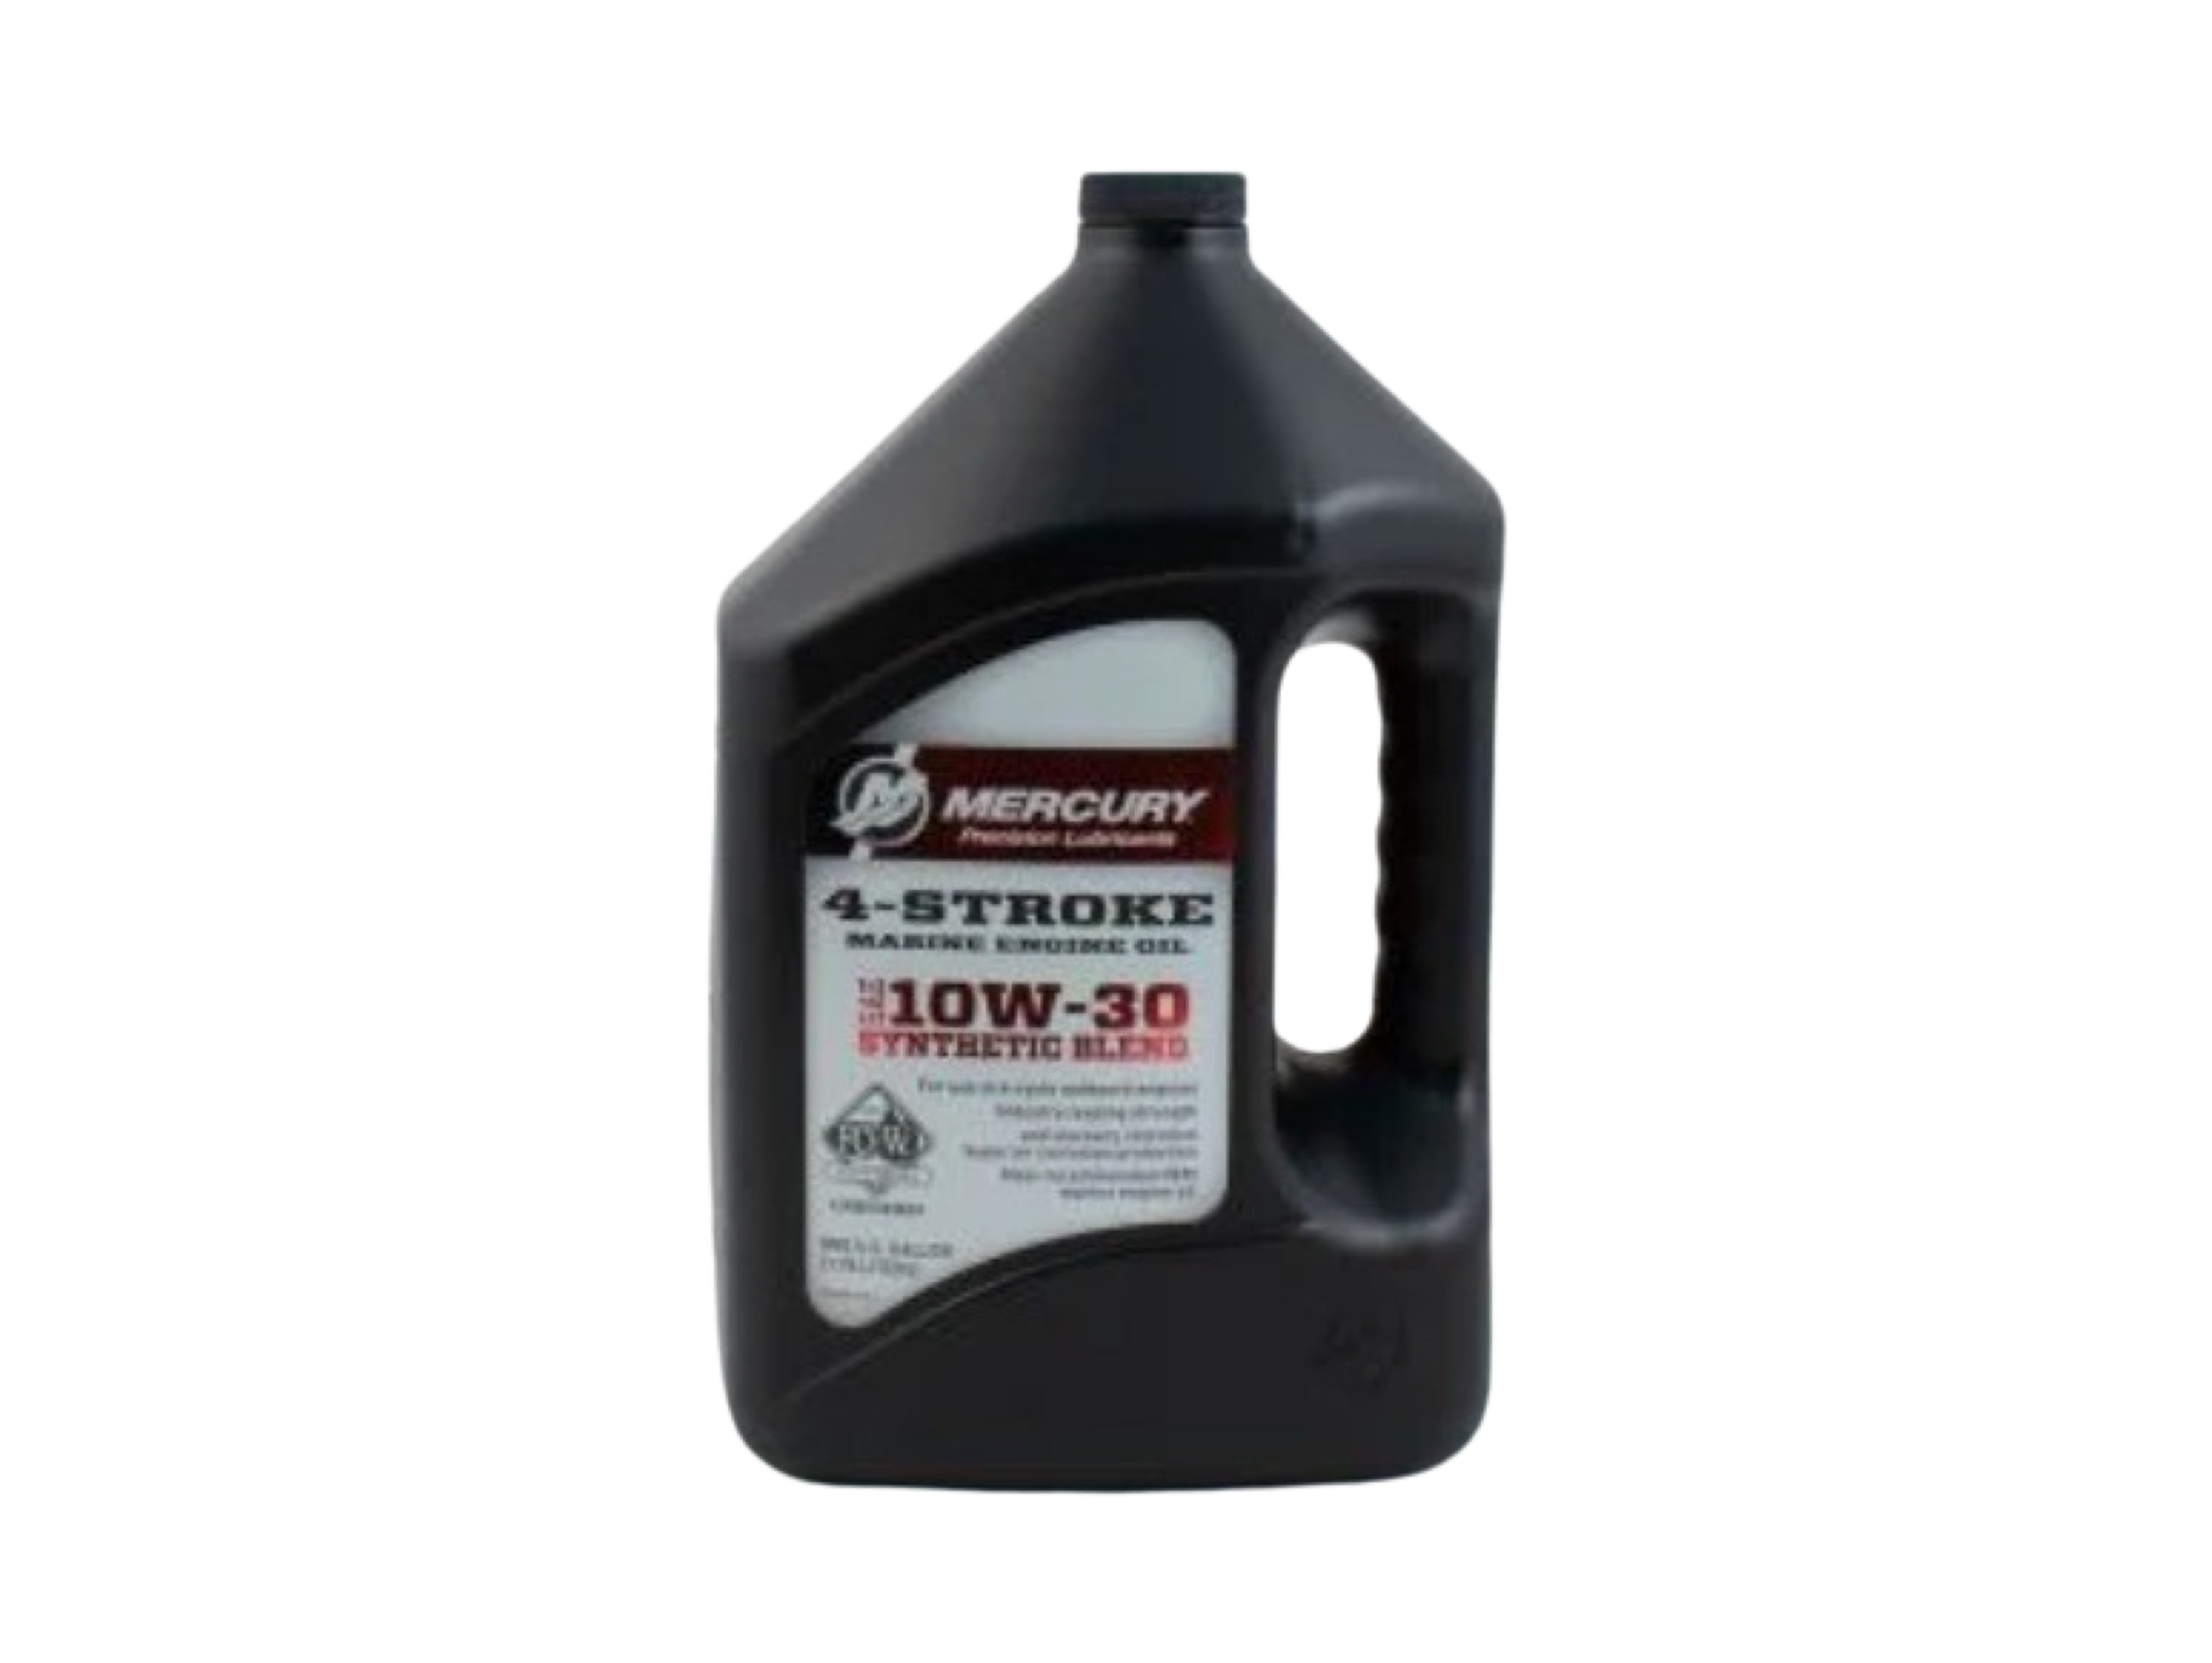 10W-30 Synthetic Blend Marine Engine Oil P/N: 8M0142151